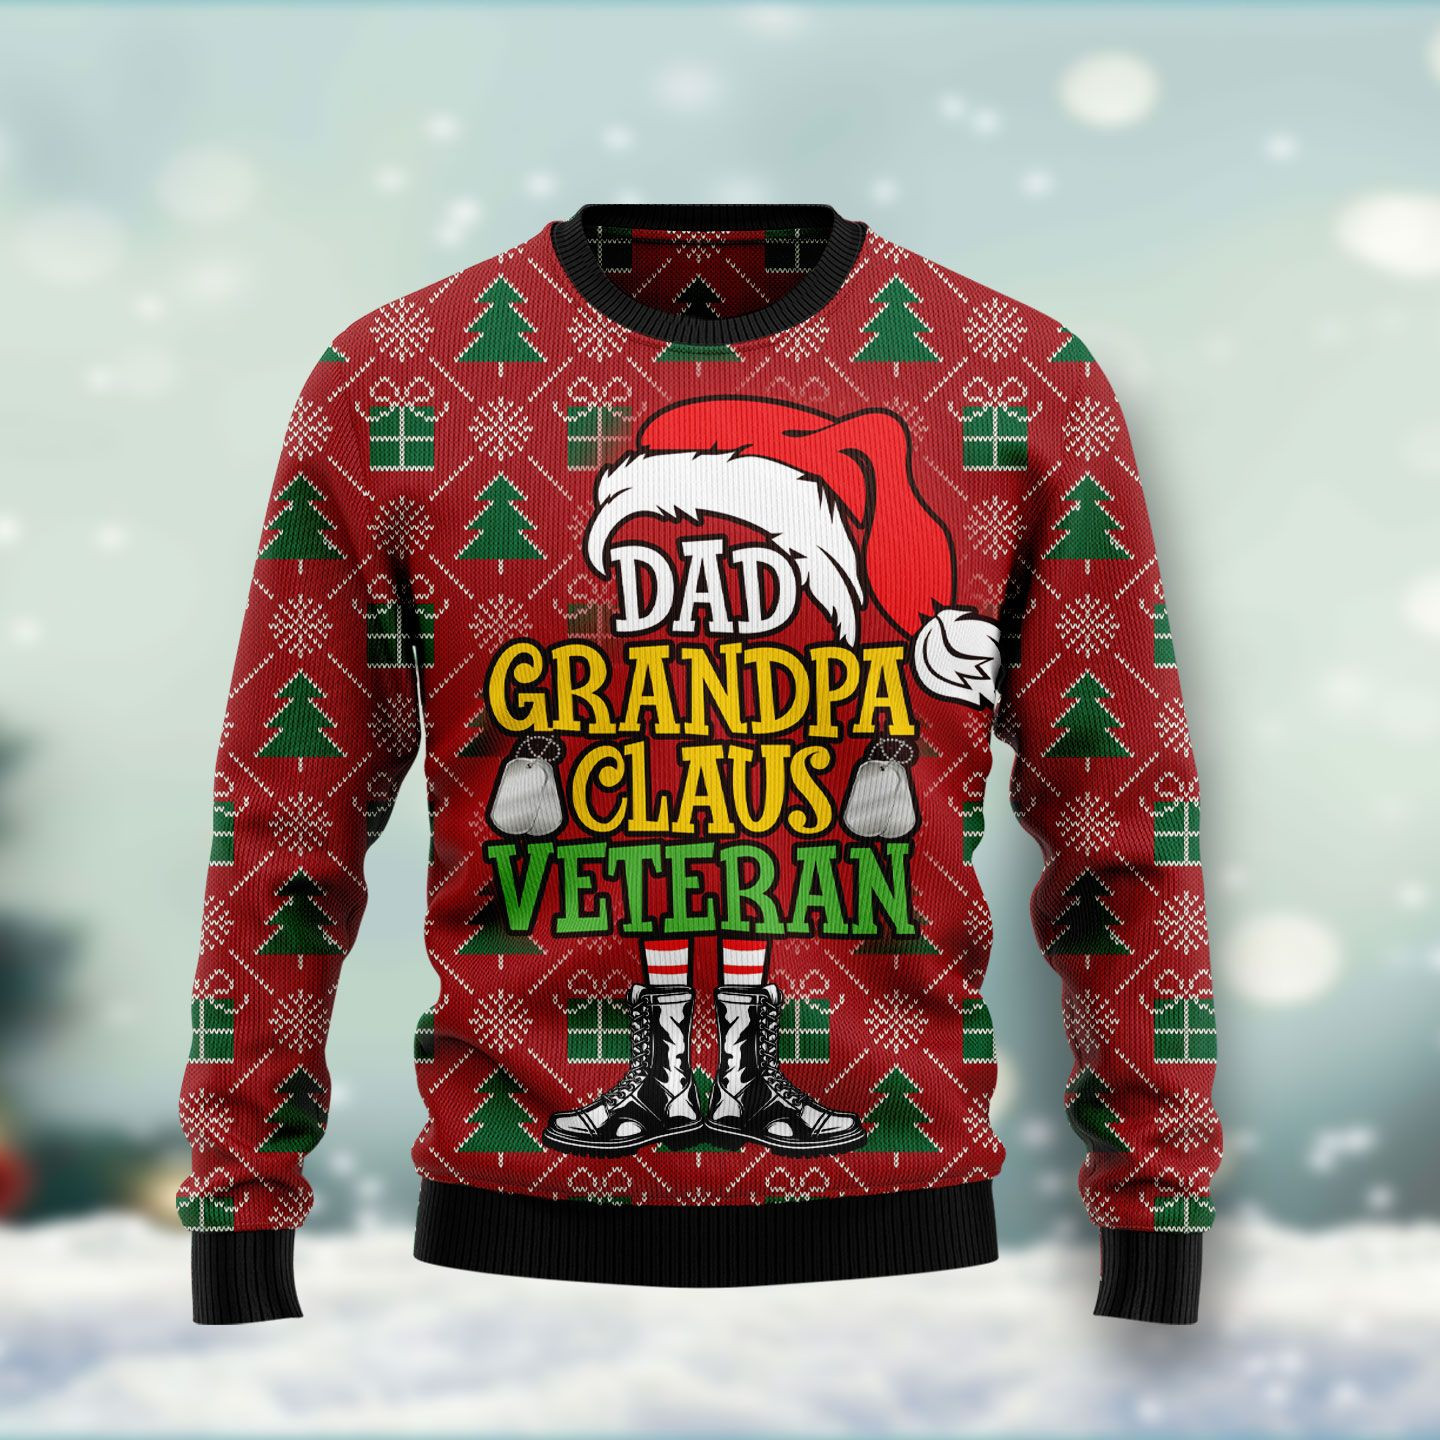 Dad Grandpa Claus Veteran Ugly Christmas Sweater Ugly Sweater For Men Women, Holiday Sweater